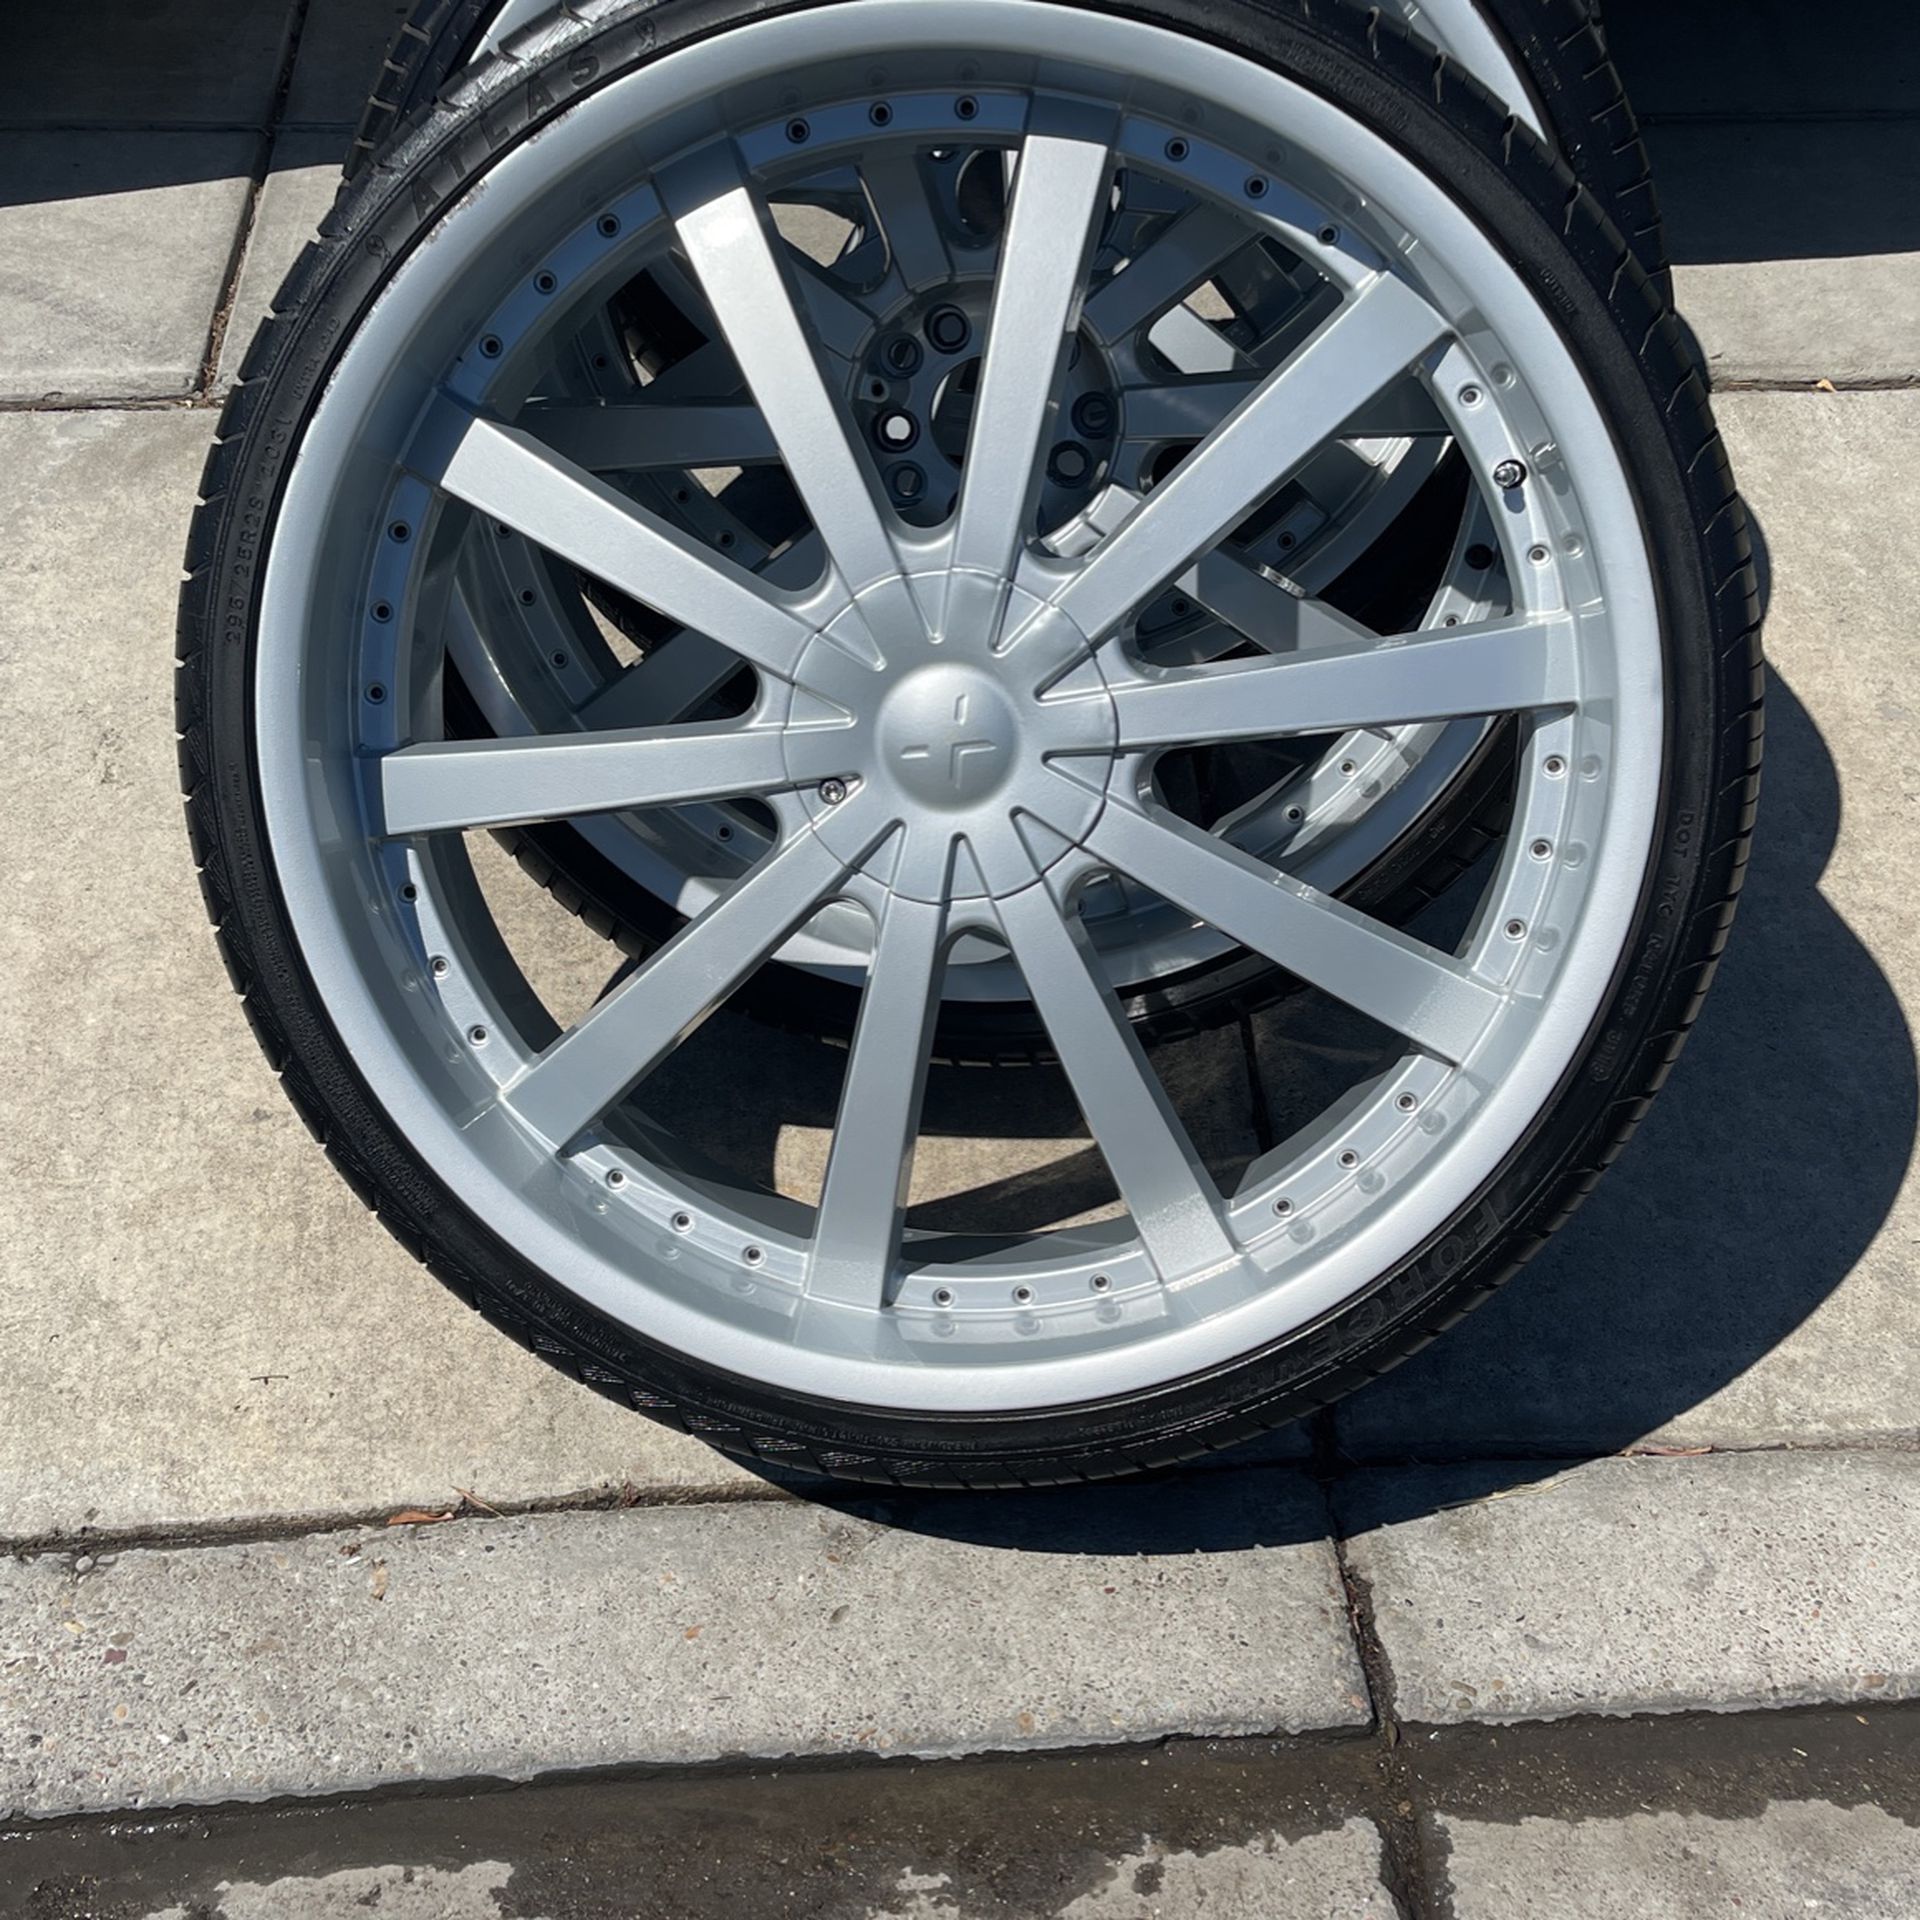 28 inch rims 4sale with brand new tires 295/25/28s universal fits big 5 bolt pattern